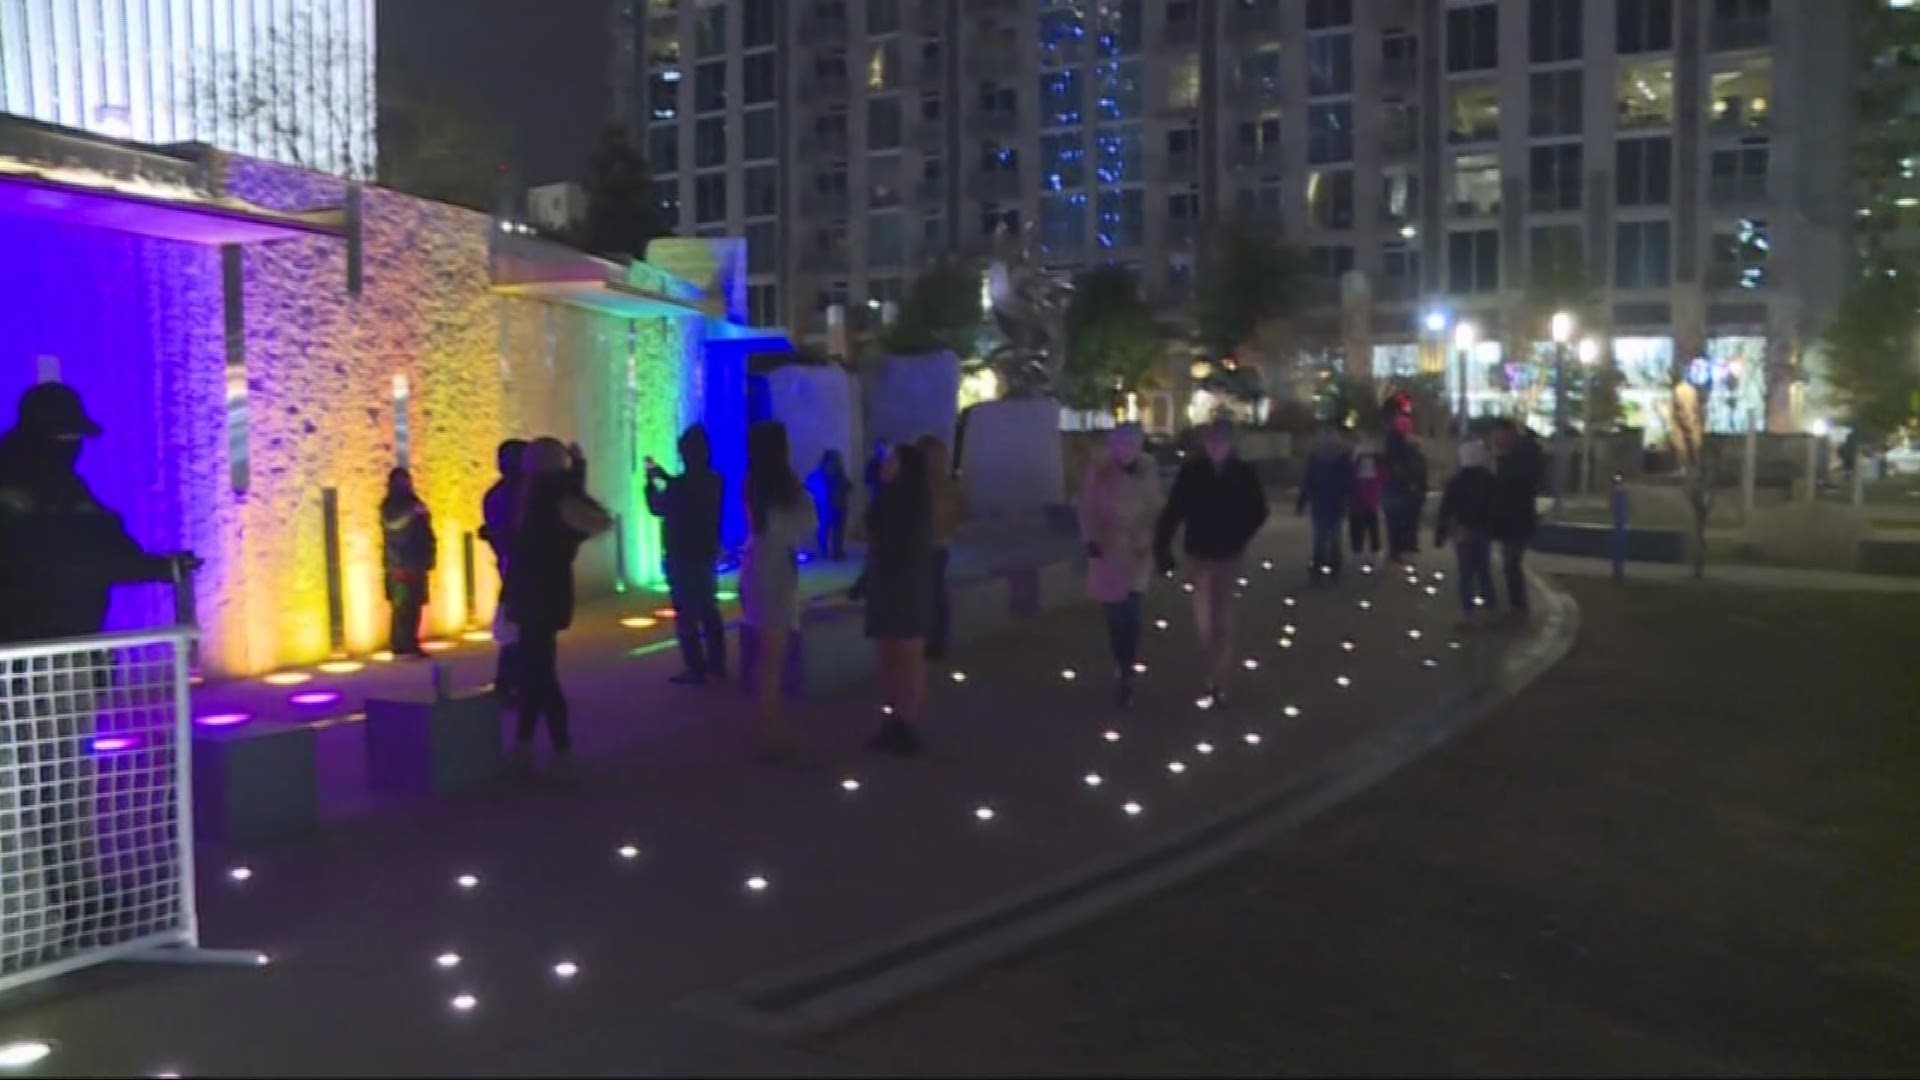 Many gathered at Romare Bearden Park in uptown Charlotte to join the annual countdown.